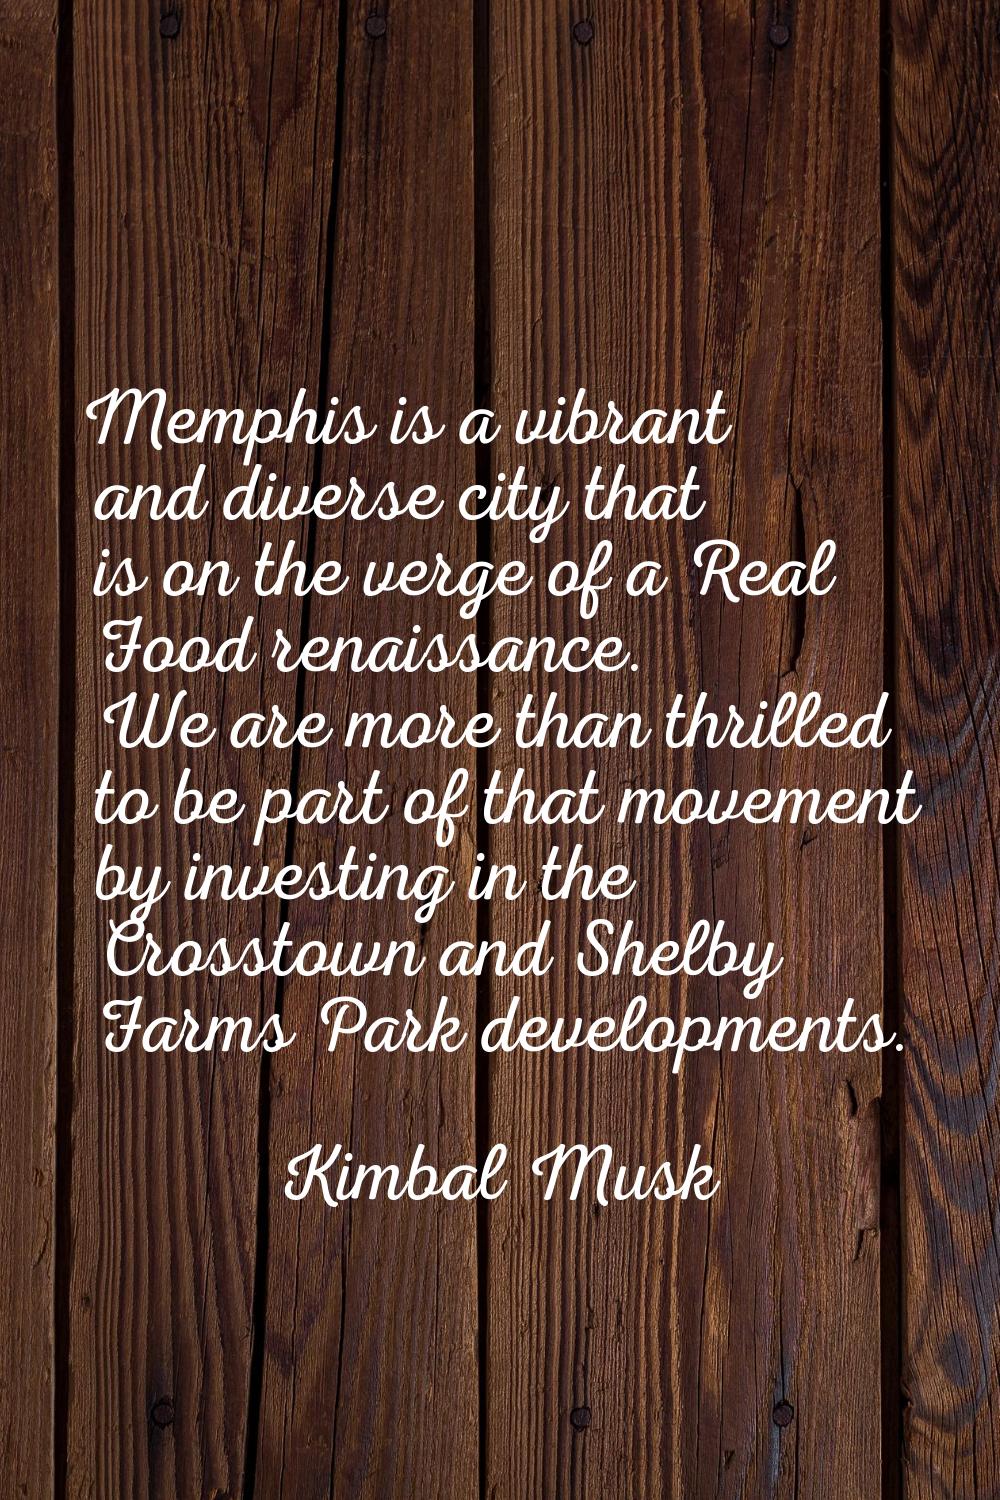 Memphis is a vibrant and diverse city that is on the verge of a Real Food renaissance. We are more 